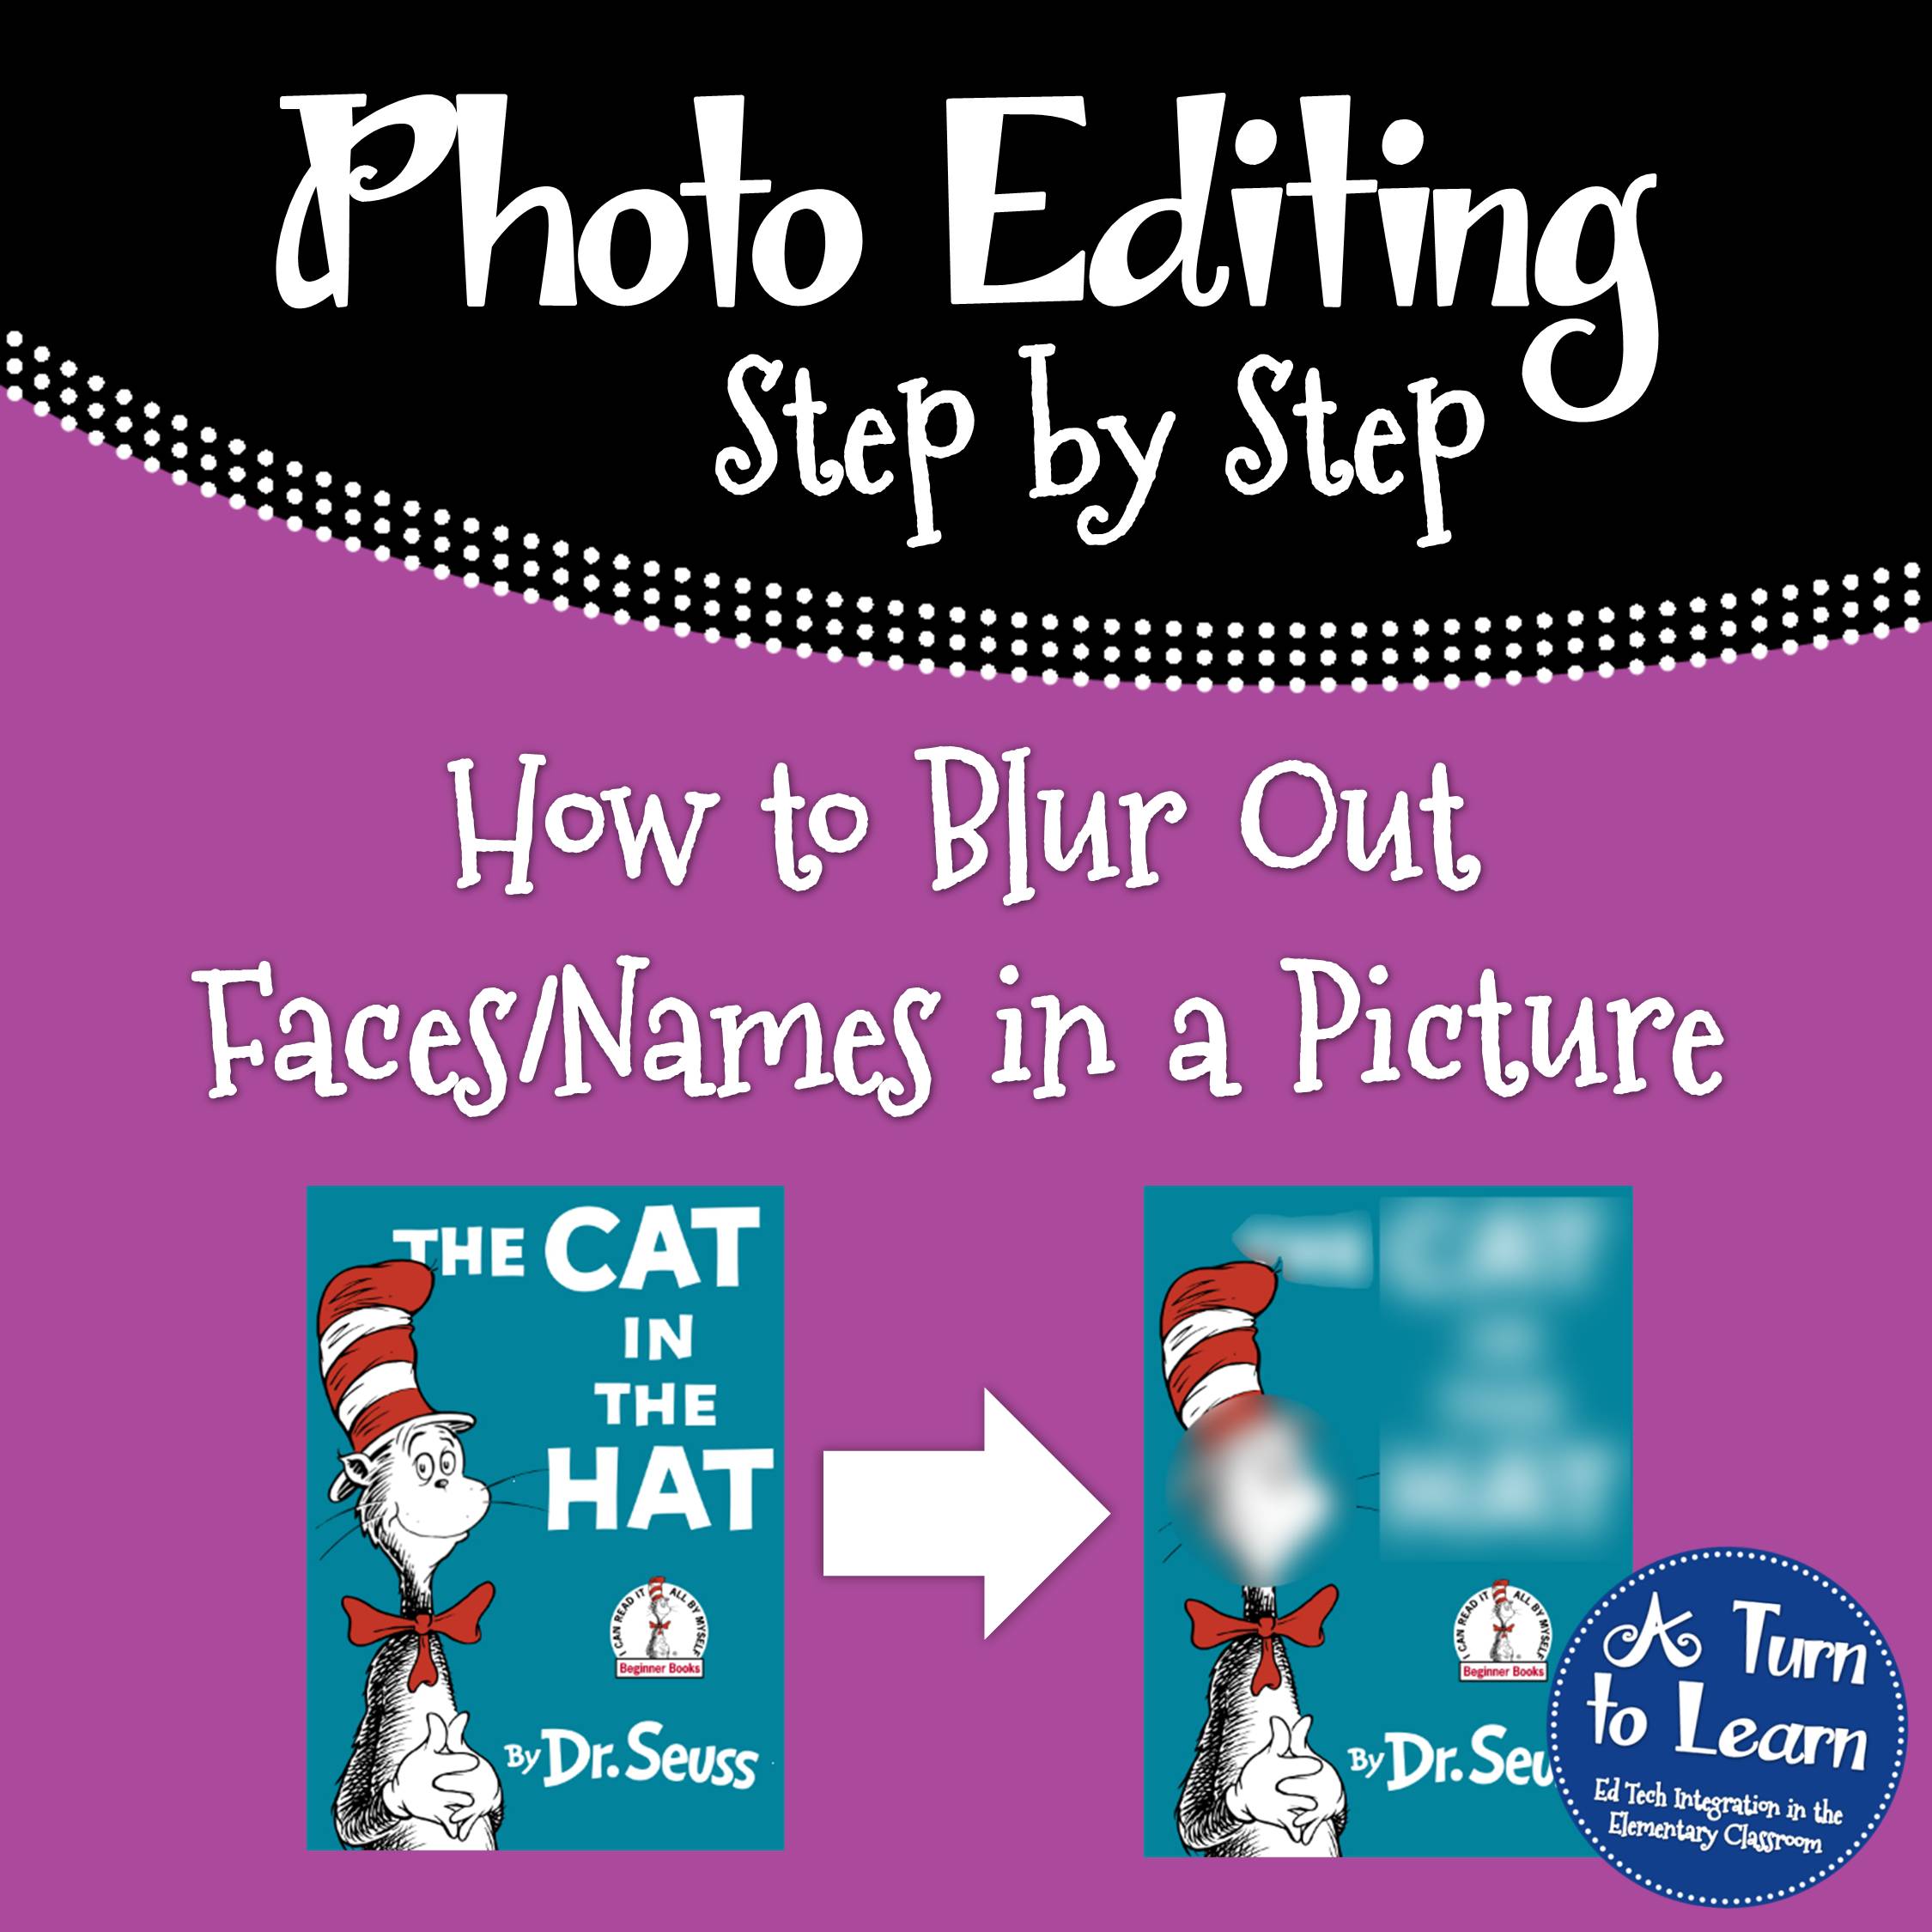 How to Blur Out Faces or Names in a Picture